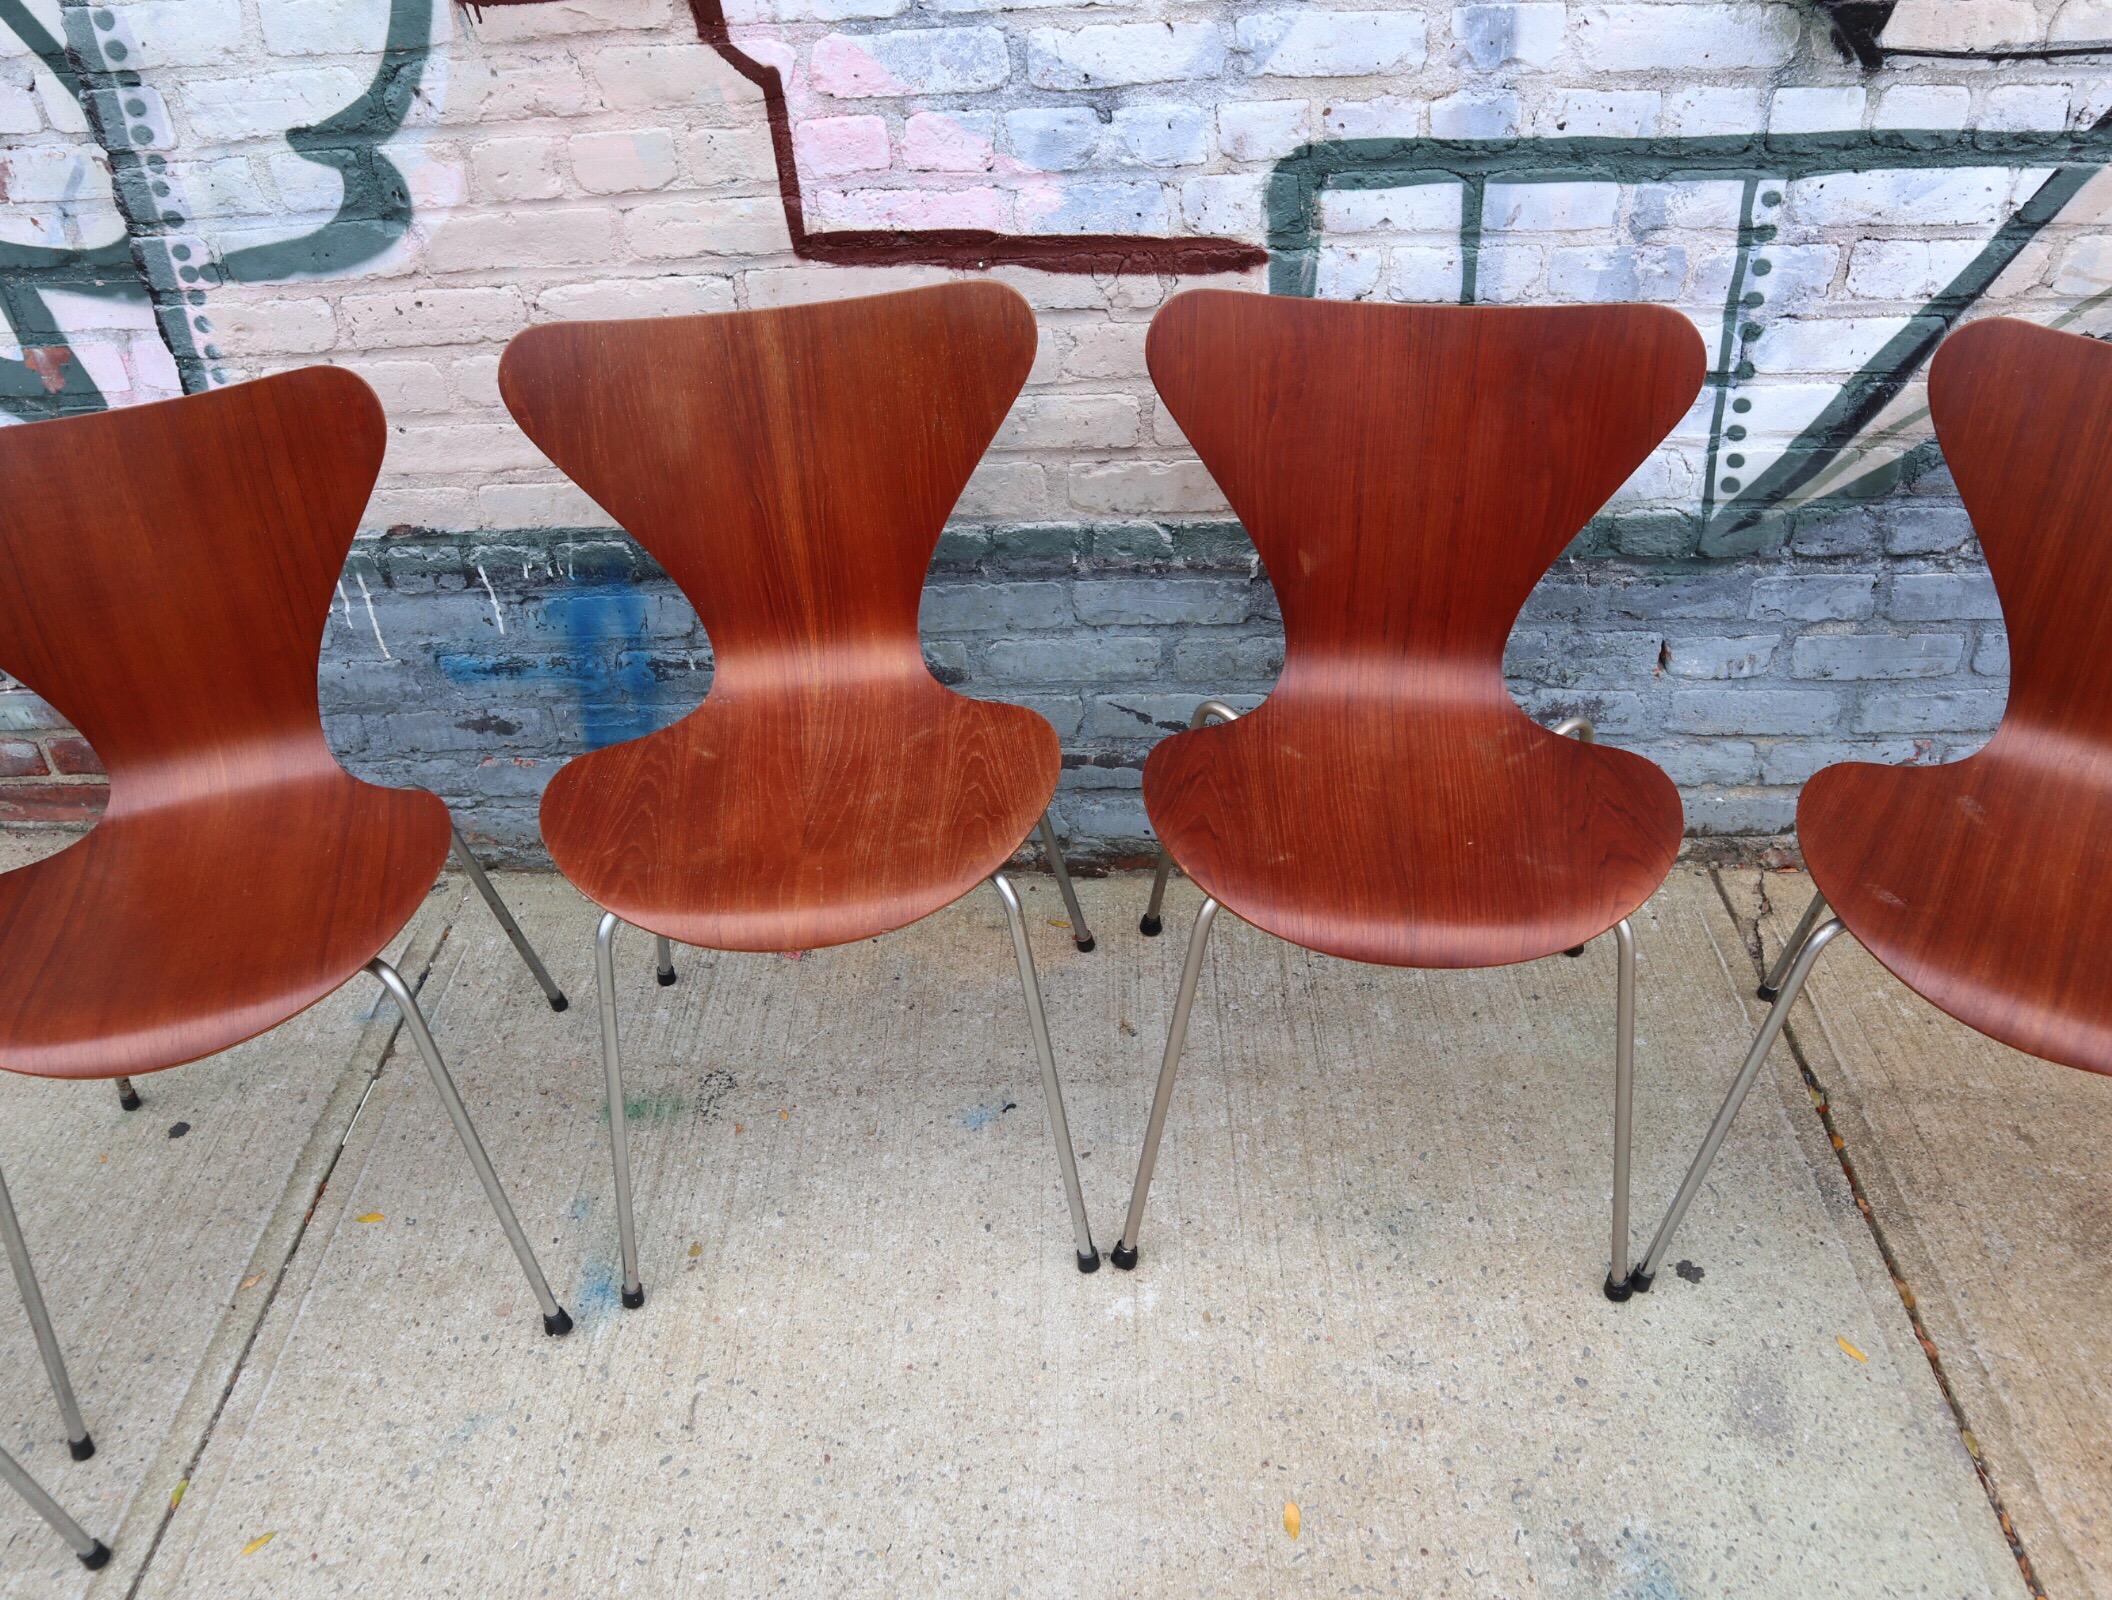 20th Century Set of Six Arne Jacobsen Series 7 Chairs in Teak Produced by Fritz Hansen